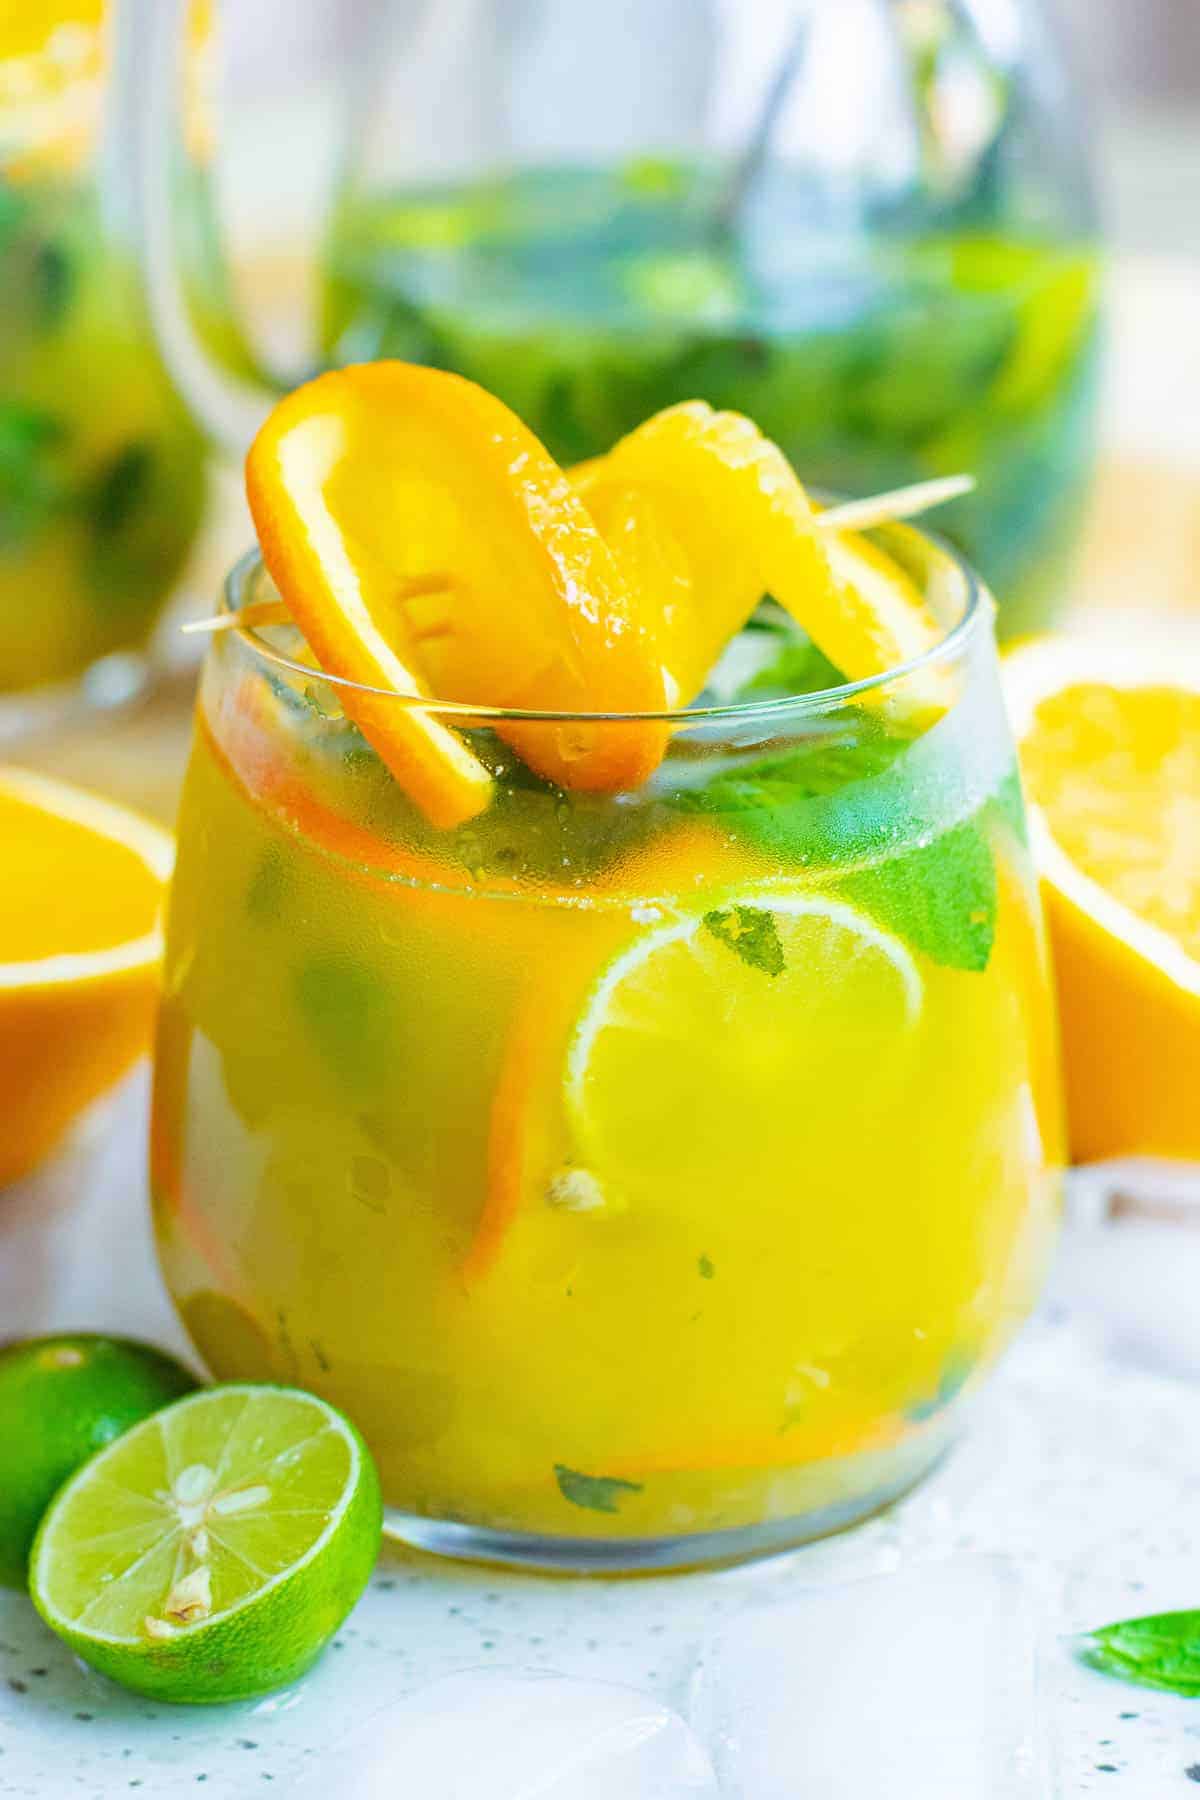 Orange mojito in a clear glass, garnished with mint and fresh orange.